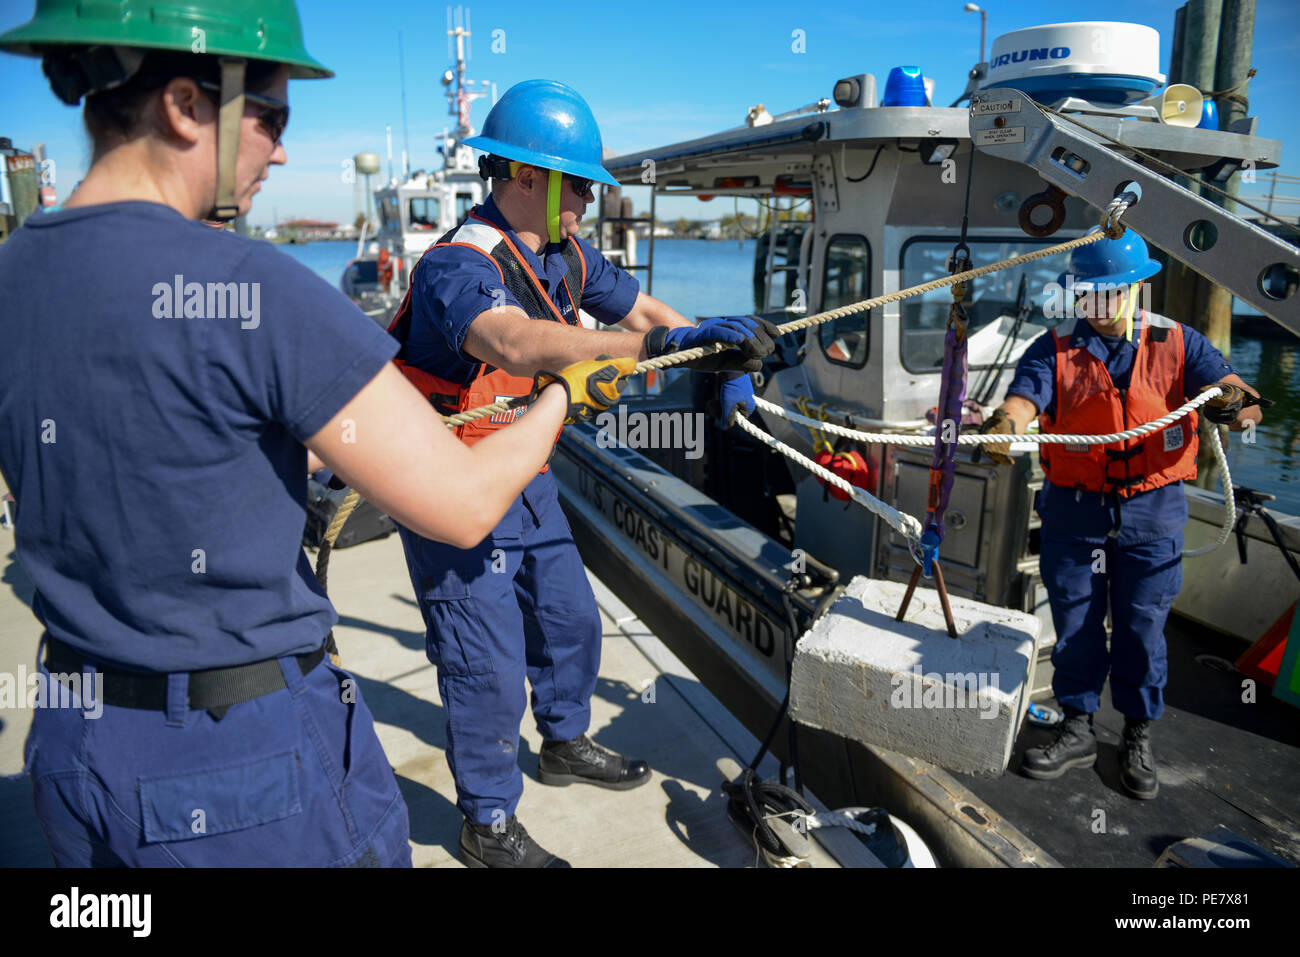 (Left to right) Fireman Brittany Barba, Petty Officer 2nd Class Justin Thornton, and Petty Officer 3rd Class Collin Blugis conduct a dynamic load test on the crane onboard the 26-Foot Trailerable Aids to Navigation Boat from Coast Guard Aids to Navigation Team, Crisfield, Md., Wednesday, Oct. 21, 2015. Crew members from ANT Crisfield were performing davit inspections, as well as static and dynamic load tests for the crane aboard the TANB. (U.S. Coast Guard photo by Petty Officer 2nd Class David Marin) Stock Photo